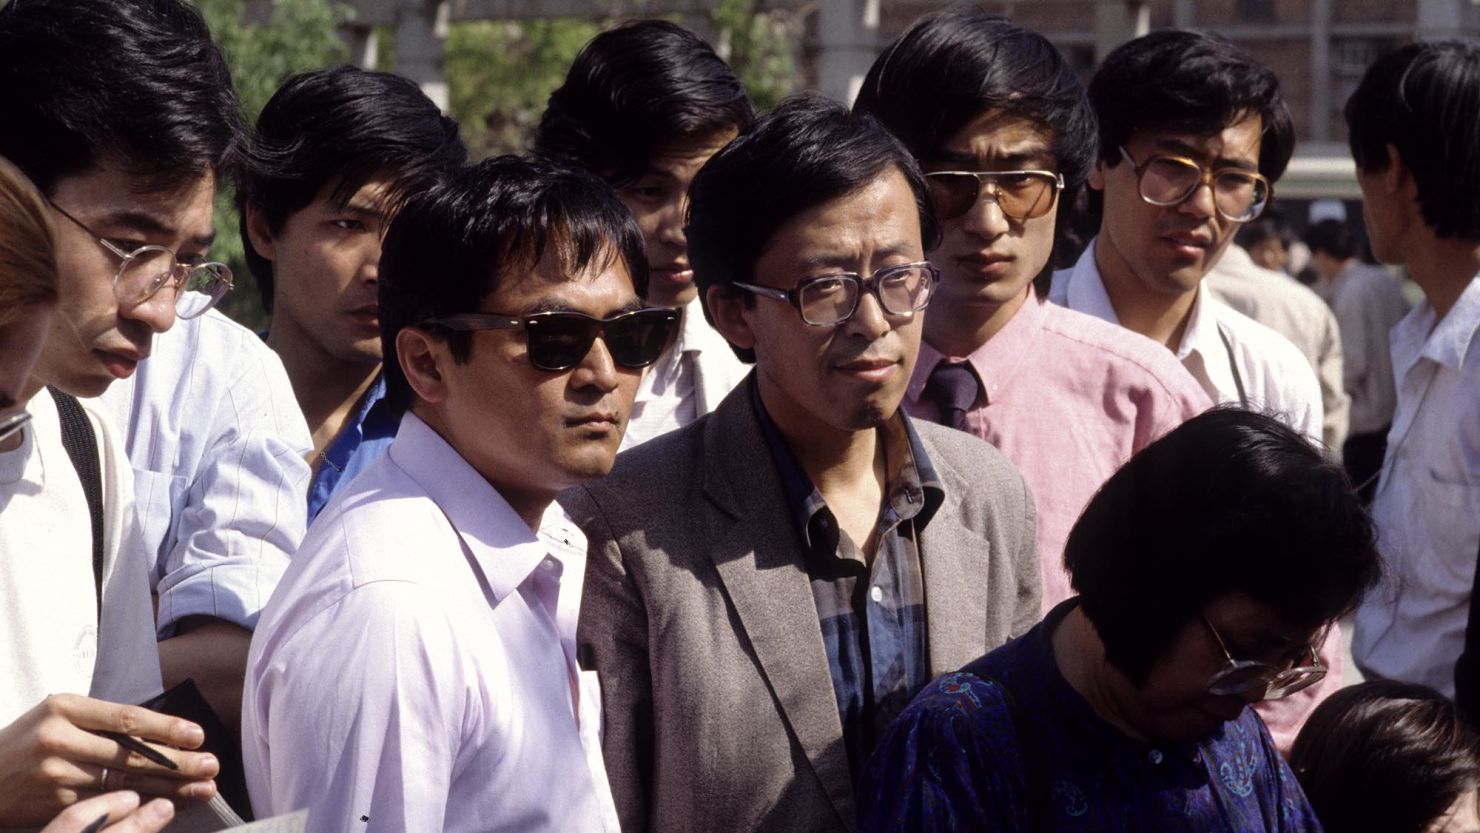 Jaime A. FlorCruz, then a TIME reporter, is seen in dark sunglasses in a crowd of journalists covering events in Beijing  in 1989.